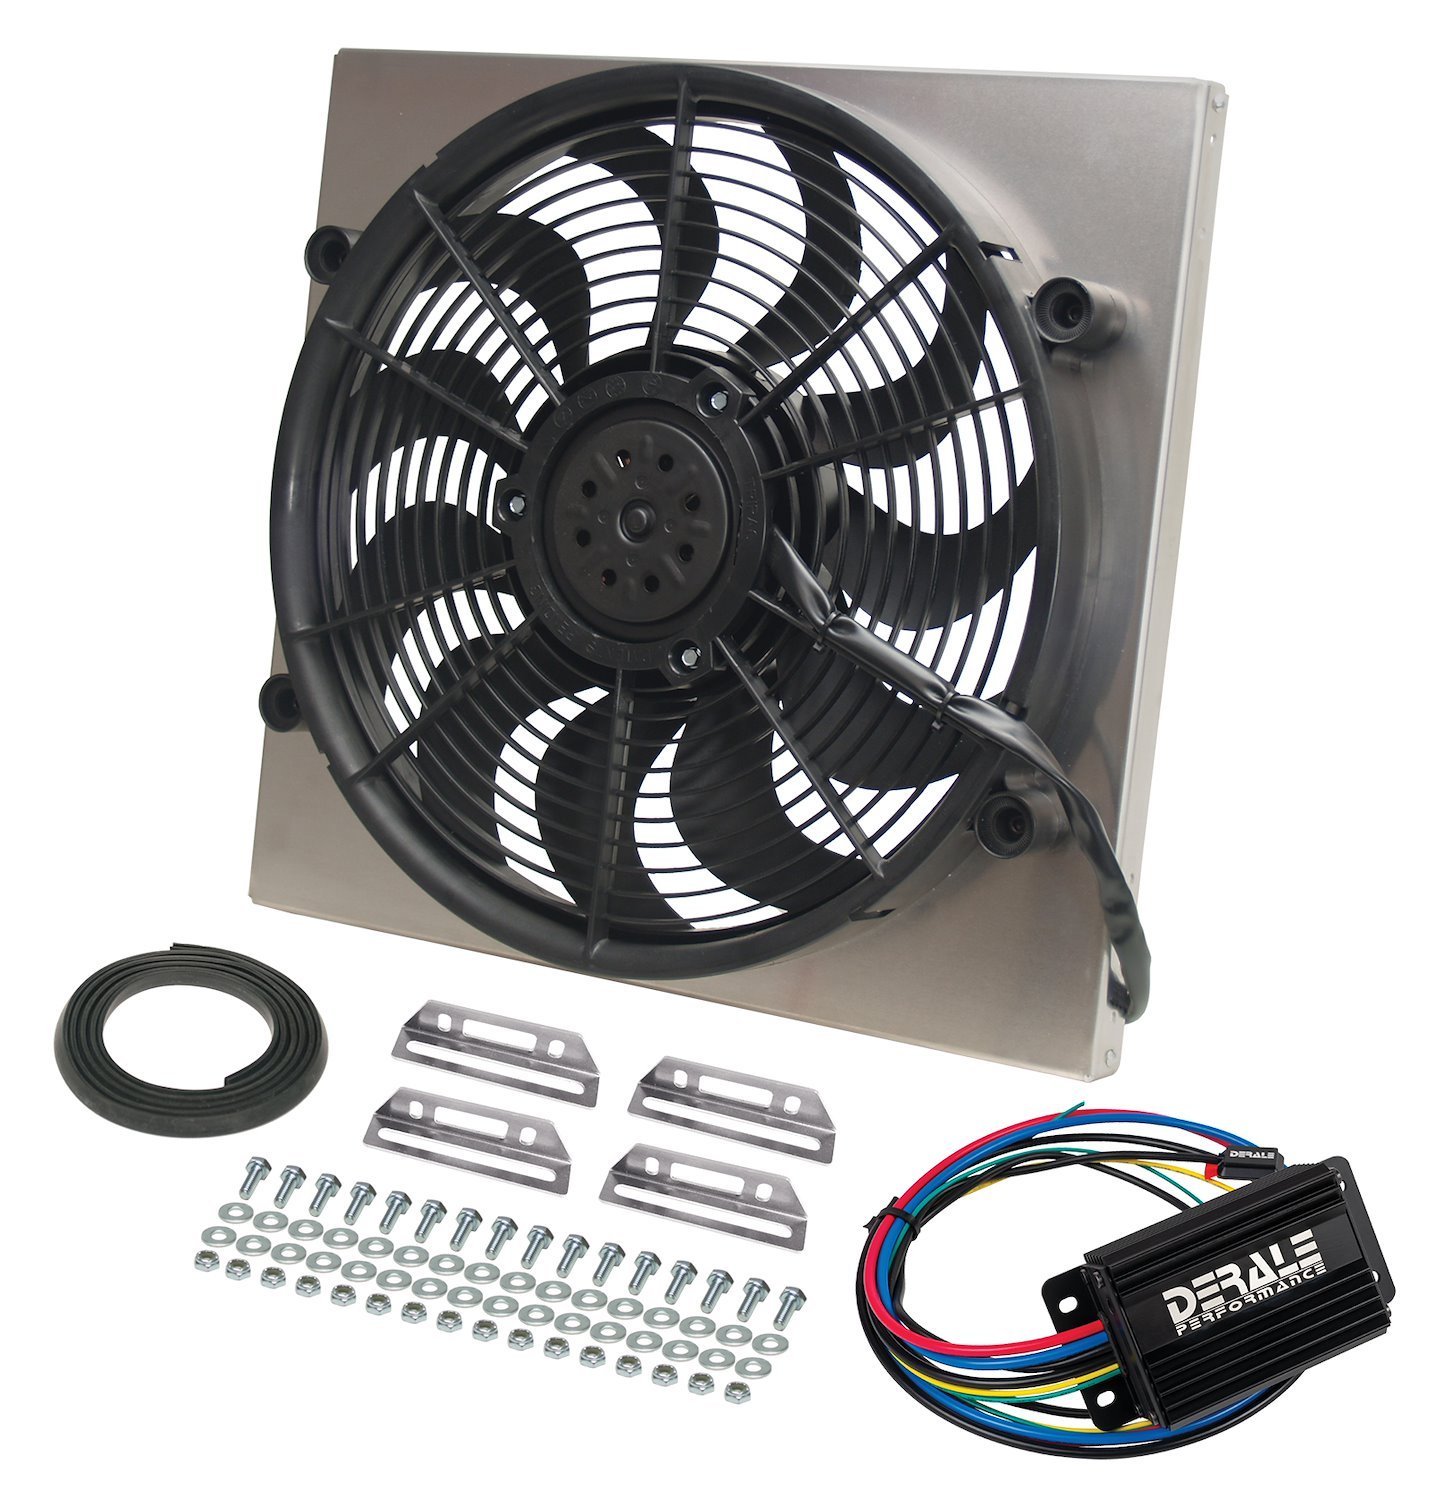 Multi-Speed Puller Fan With PWM Controller In Aluminum